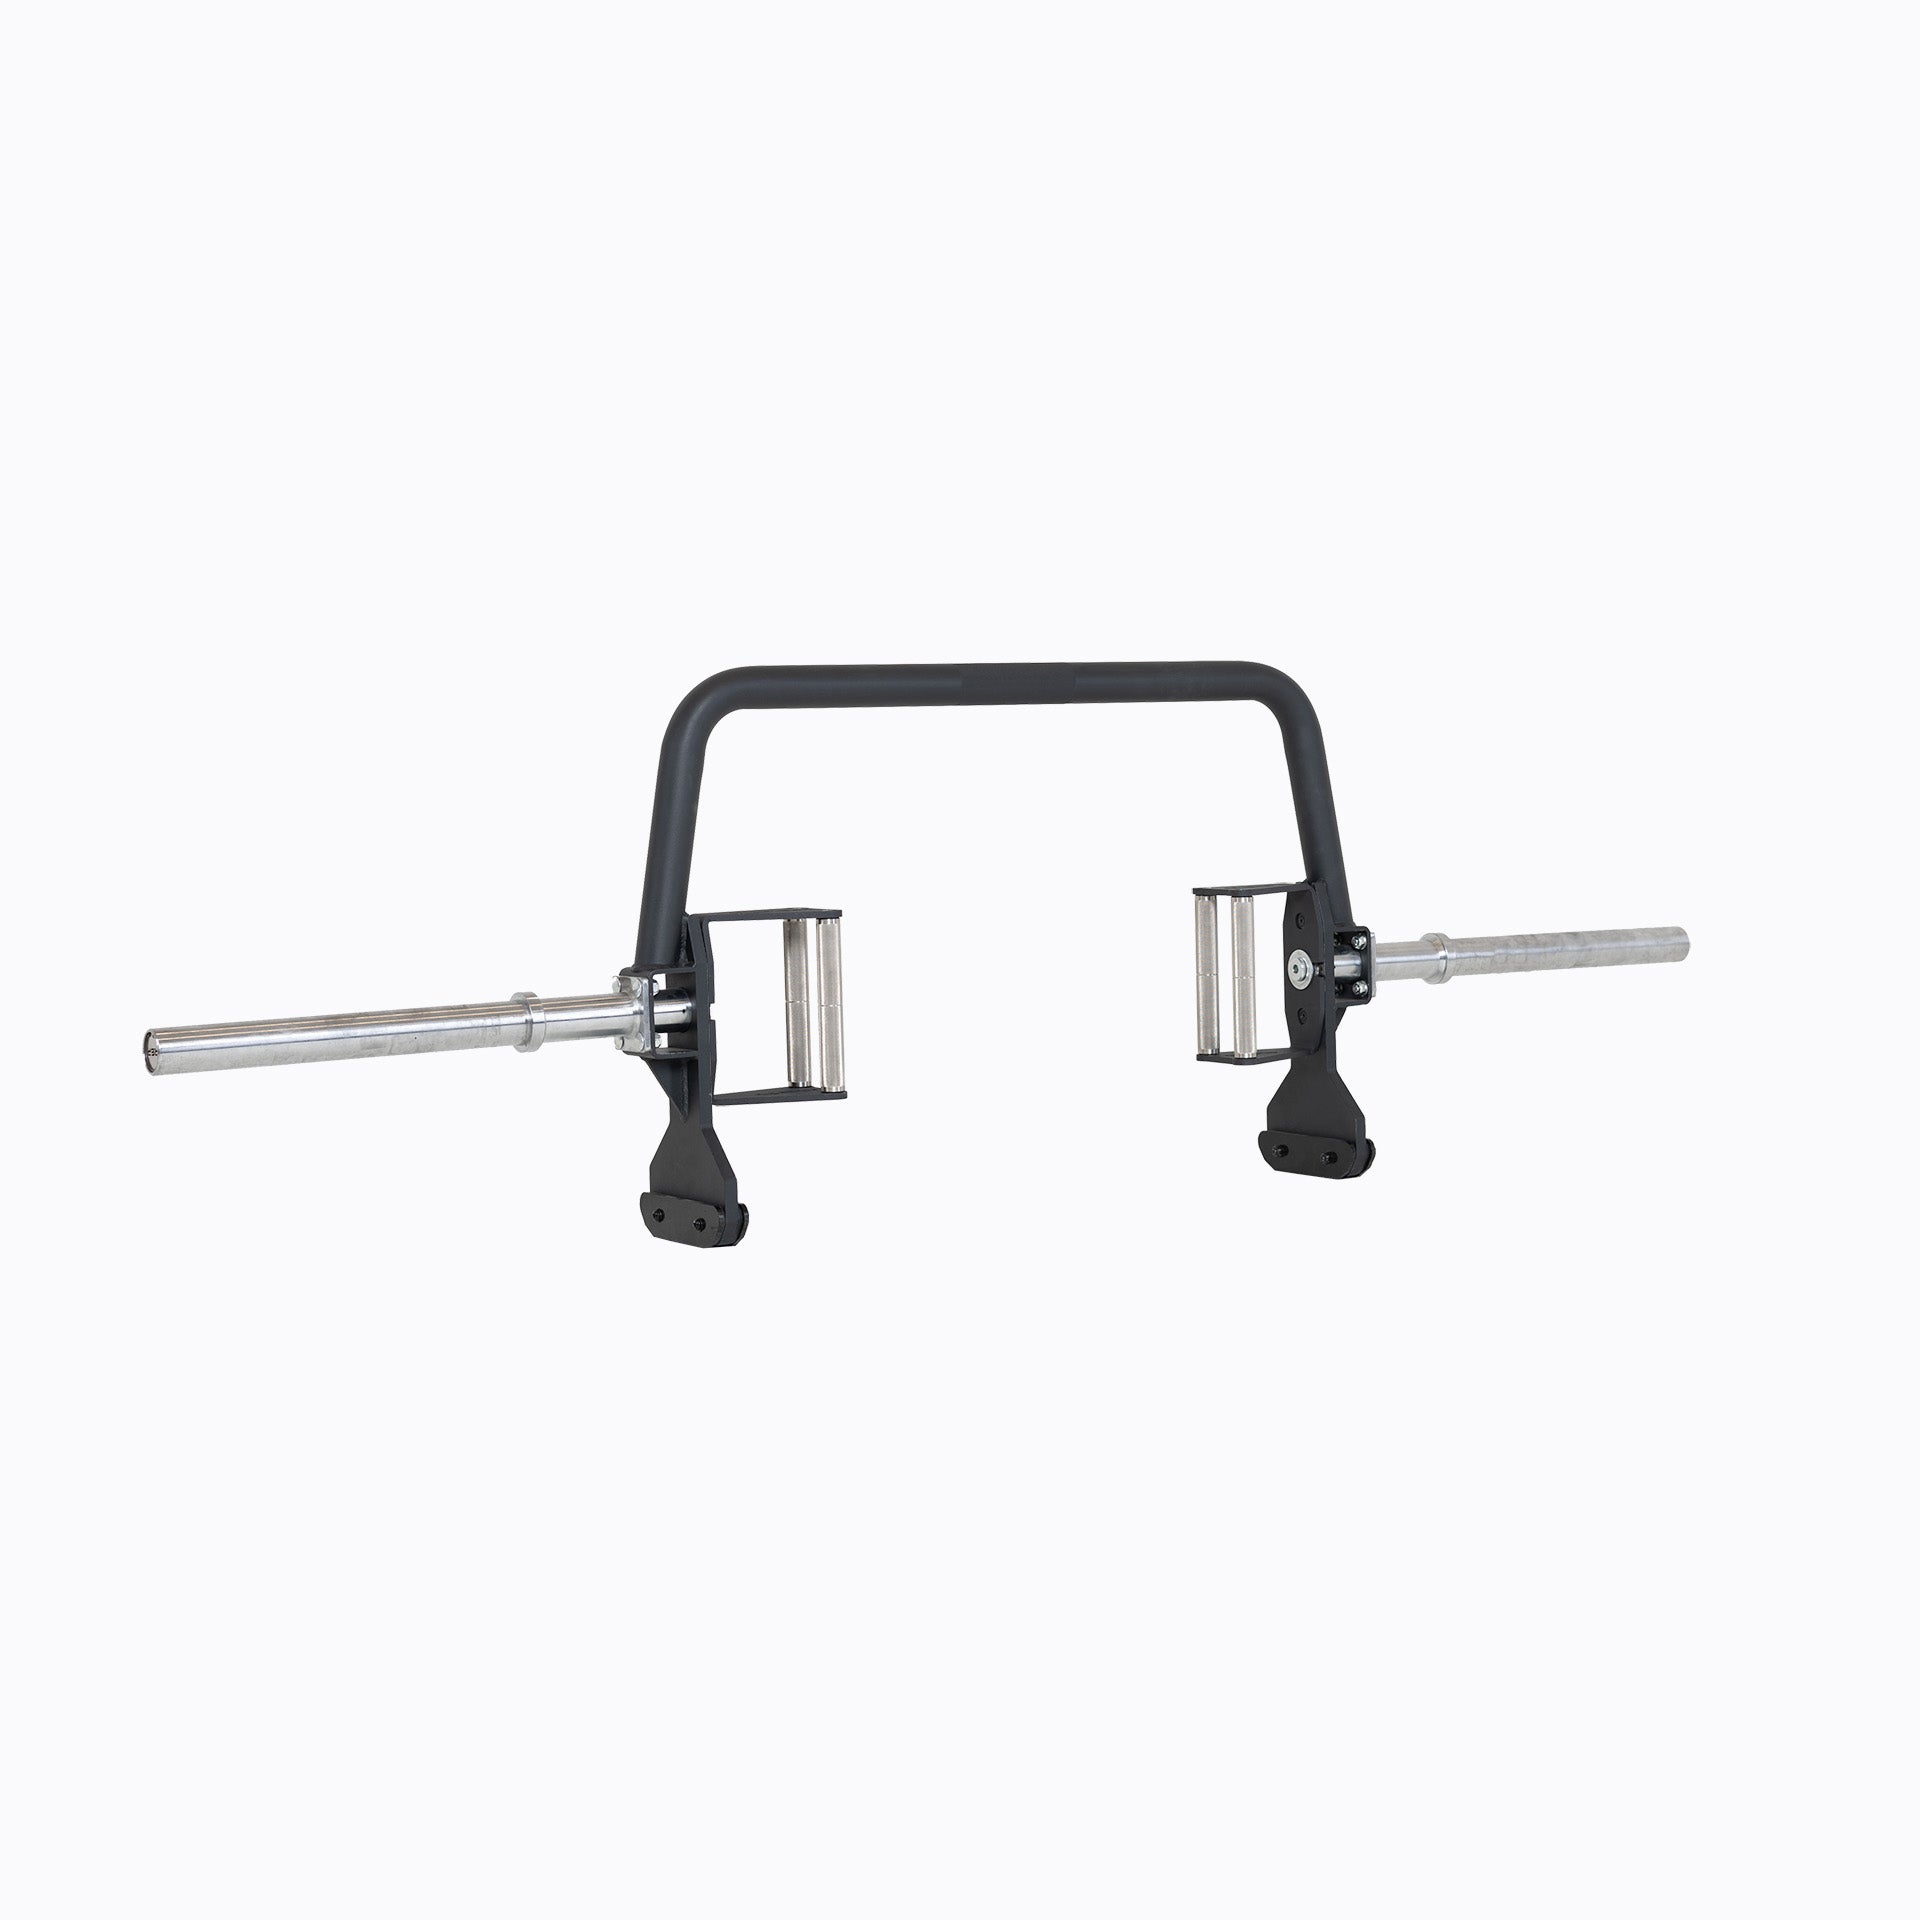 Open Trap Bar with narrow handles standing vertically on its integrated deadlift jack.